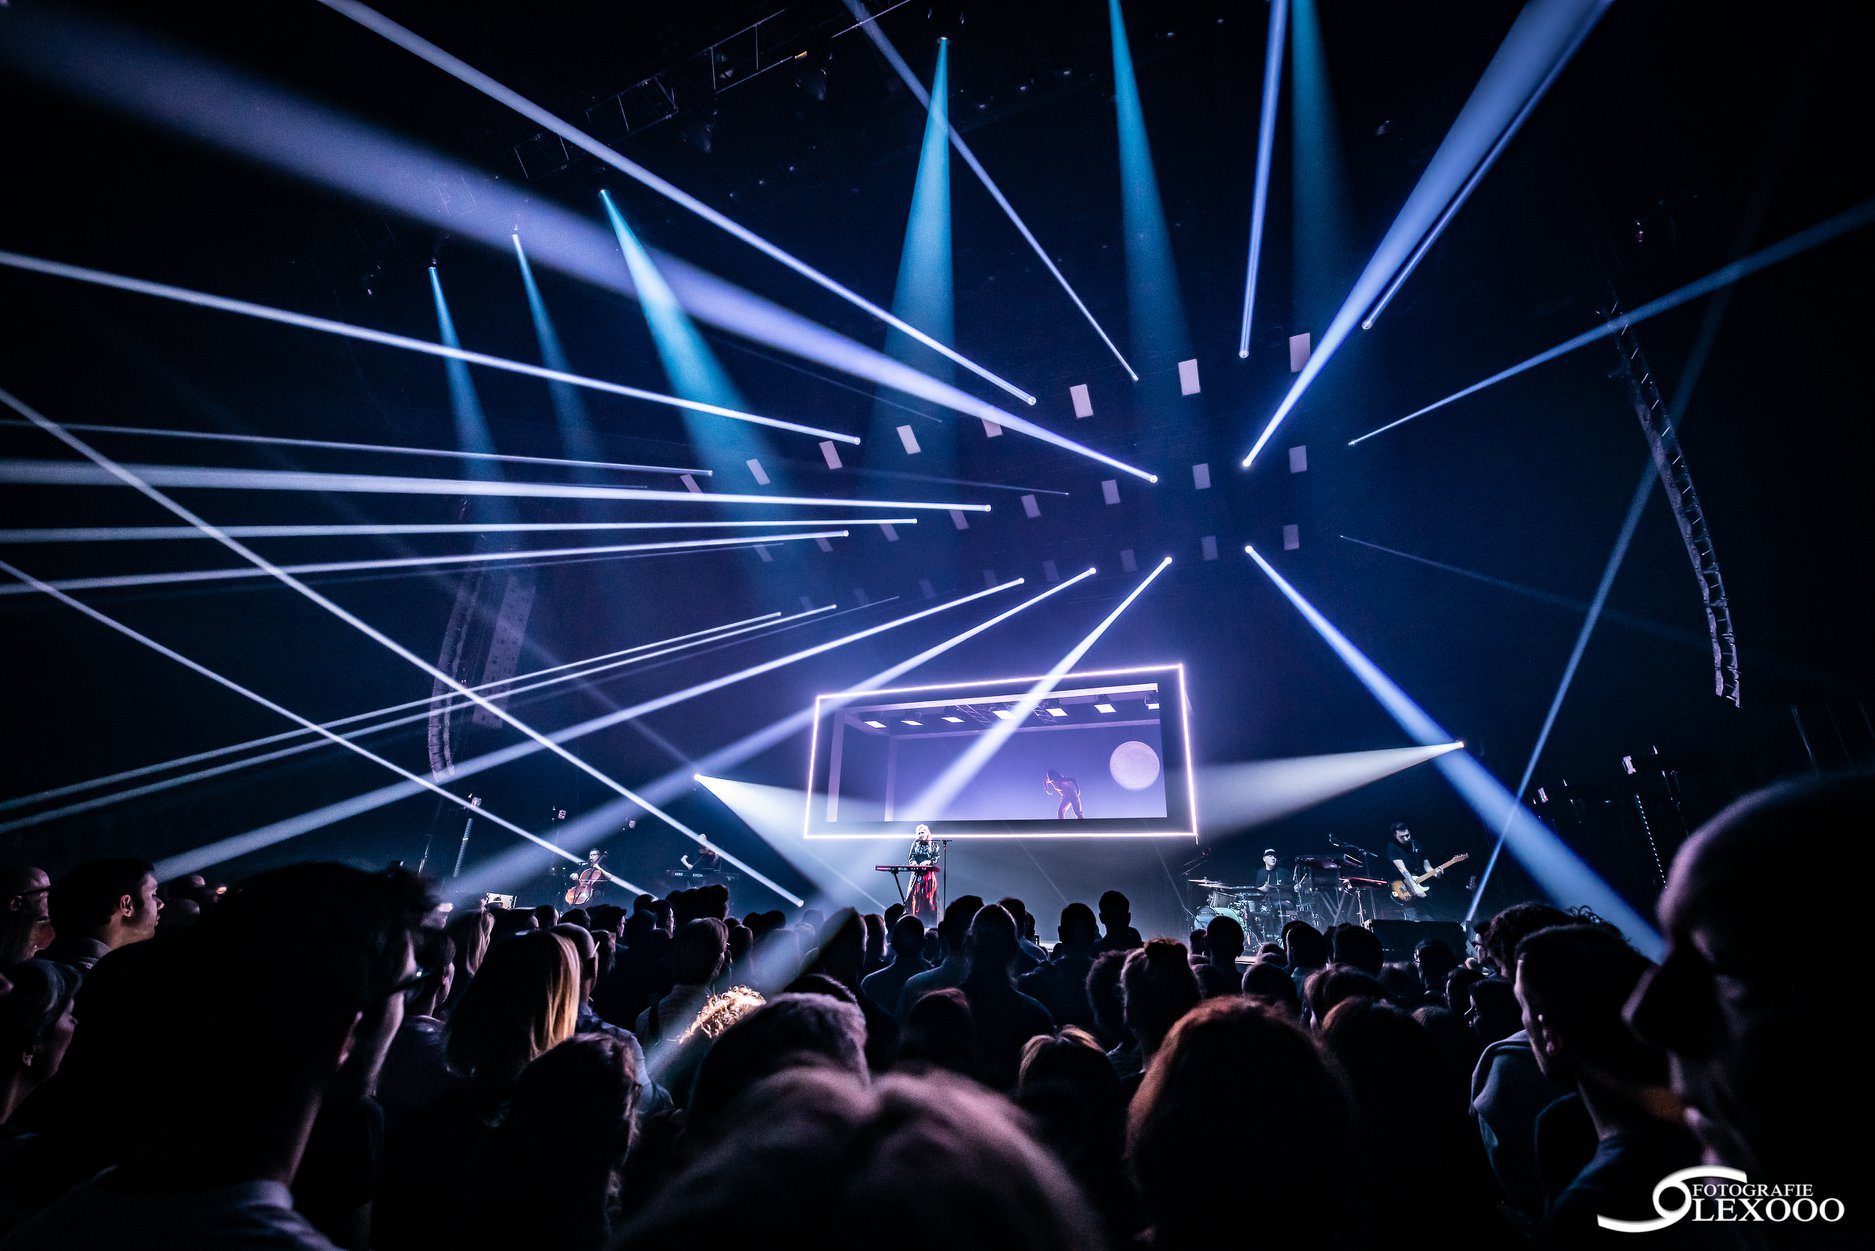 Phlippo Productions light audio sound licht Technical motion rigging Shadow to live Alice on the roof Vorst Nationaal Forest Nationale Belgie crowd publiek stage podium